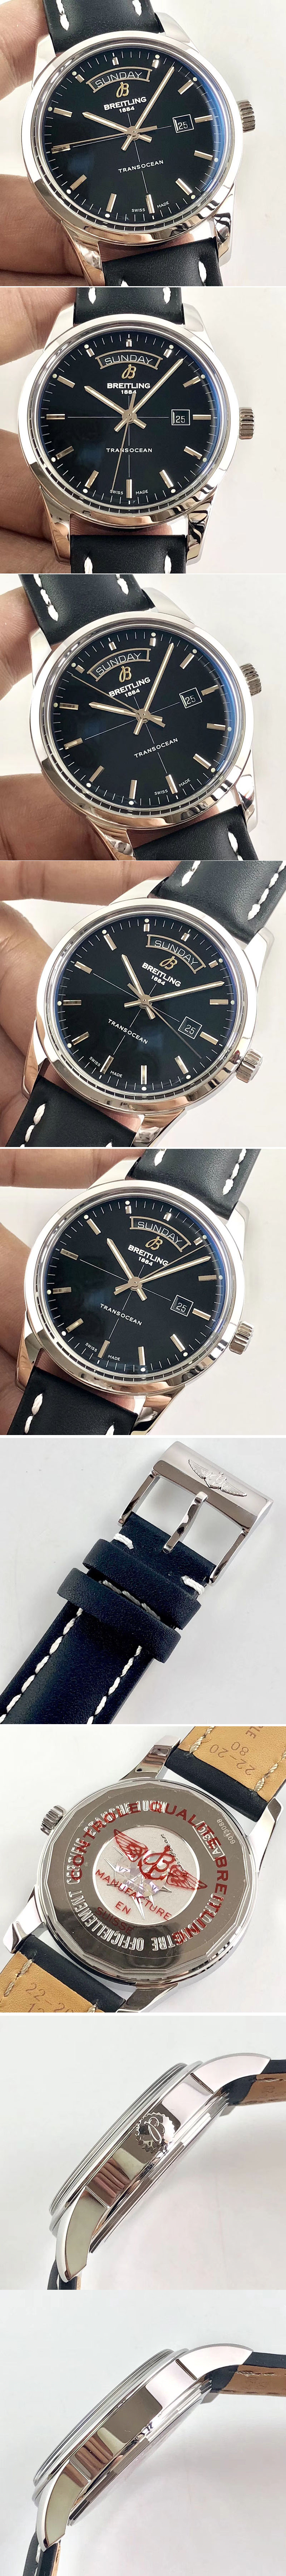 Replica Breitling Transocean Day & Date Automatic SS Black Dial on Black Leather Strap A2836 Watches